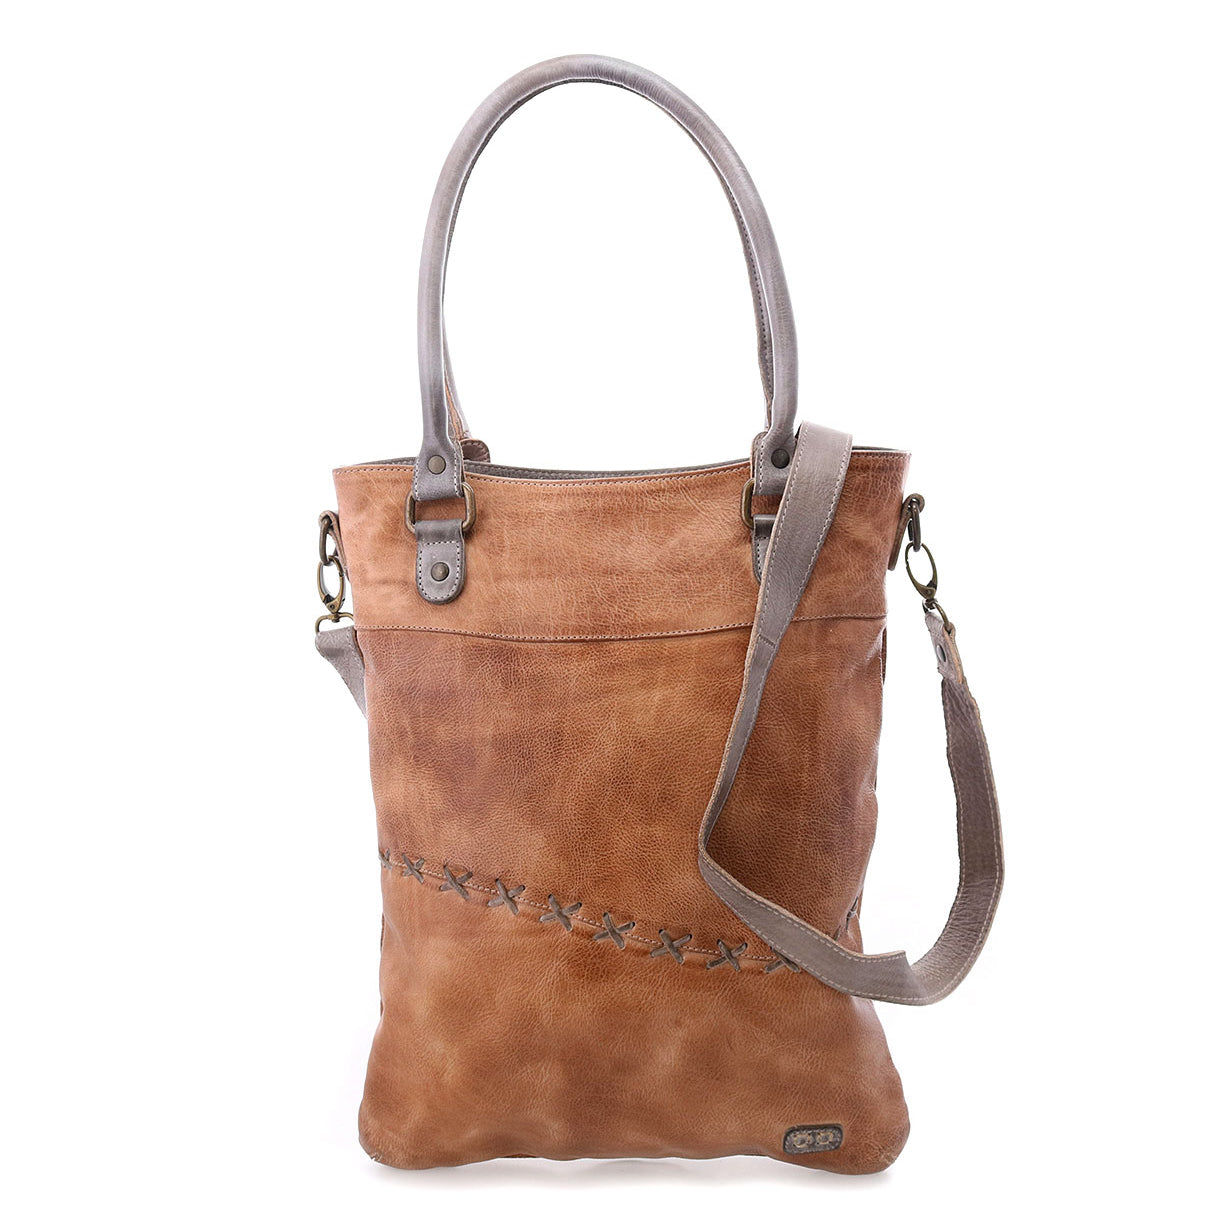 A brown leather Celta tote bag with a shoulder strap by Bed Stu.